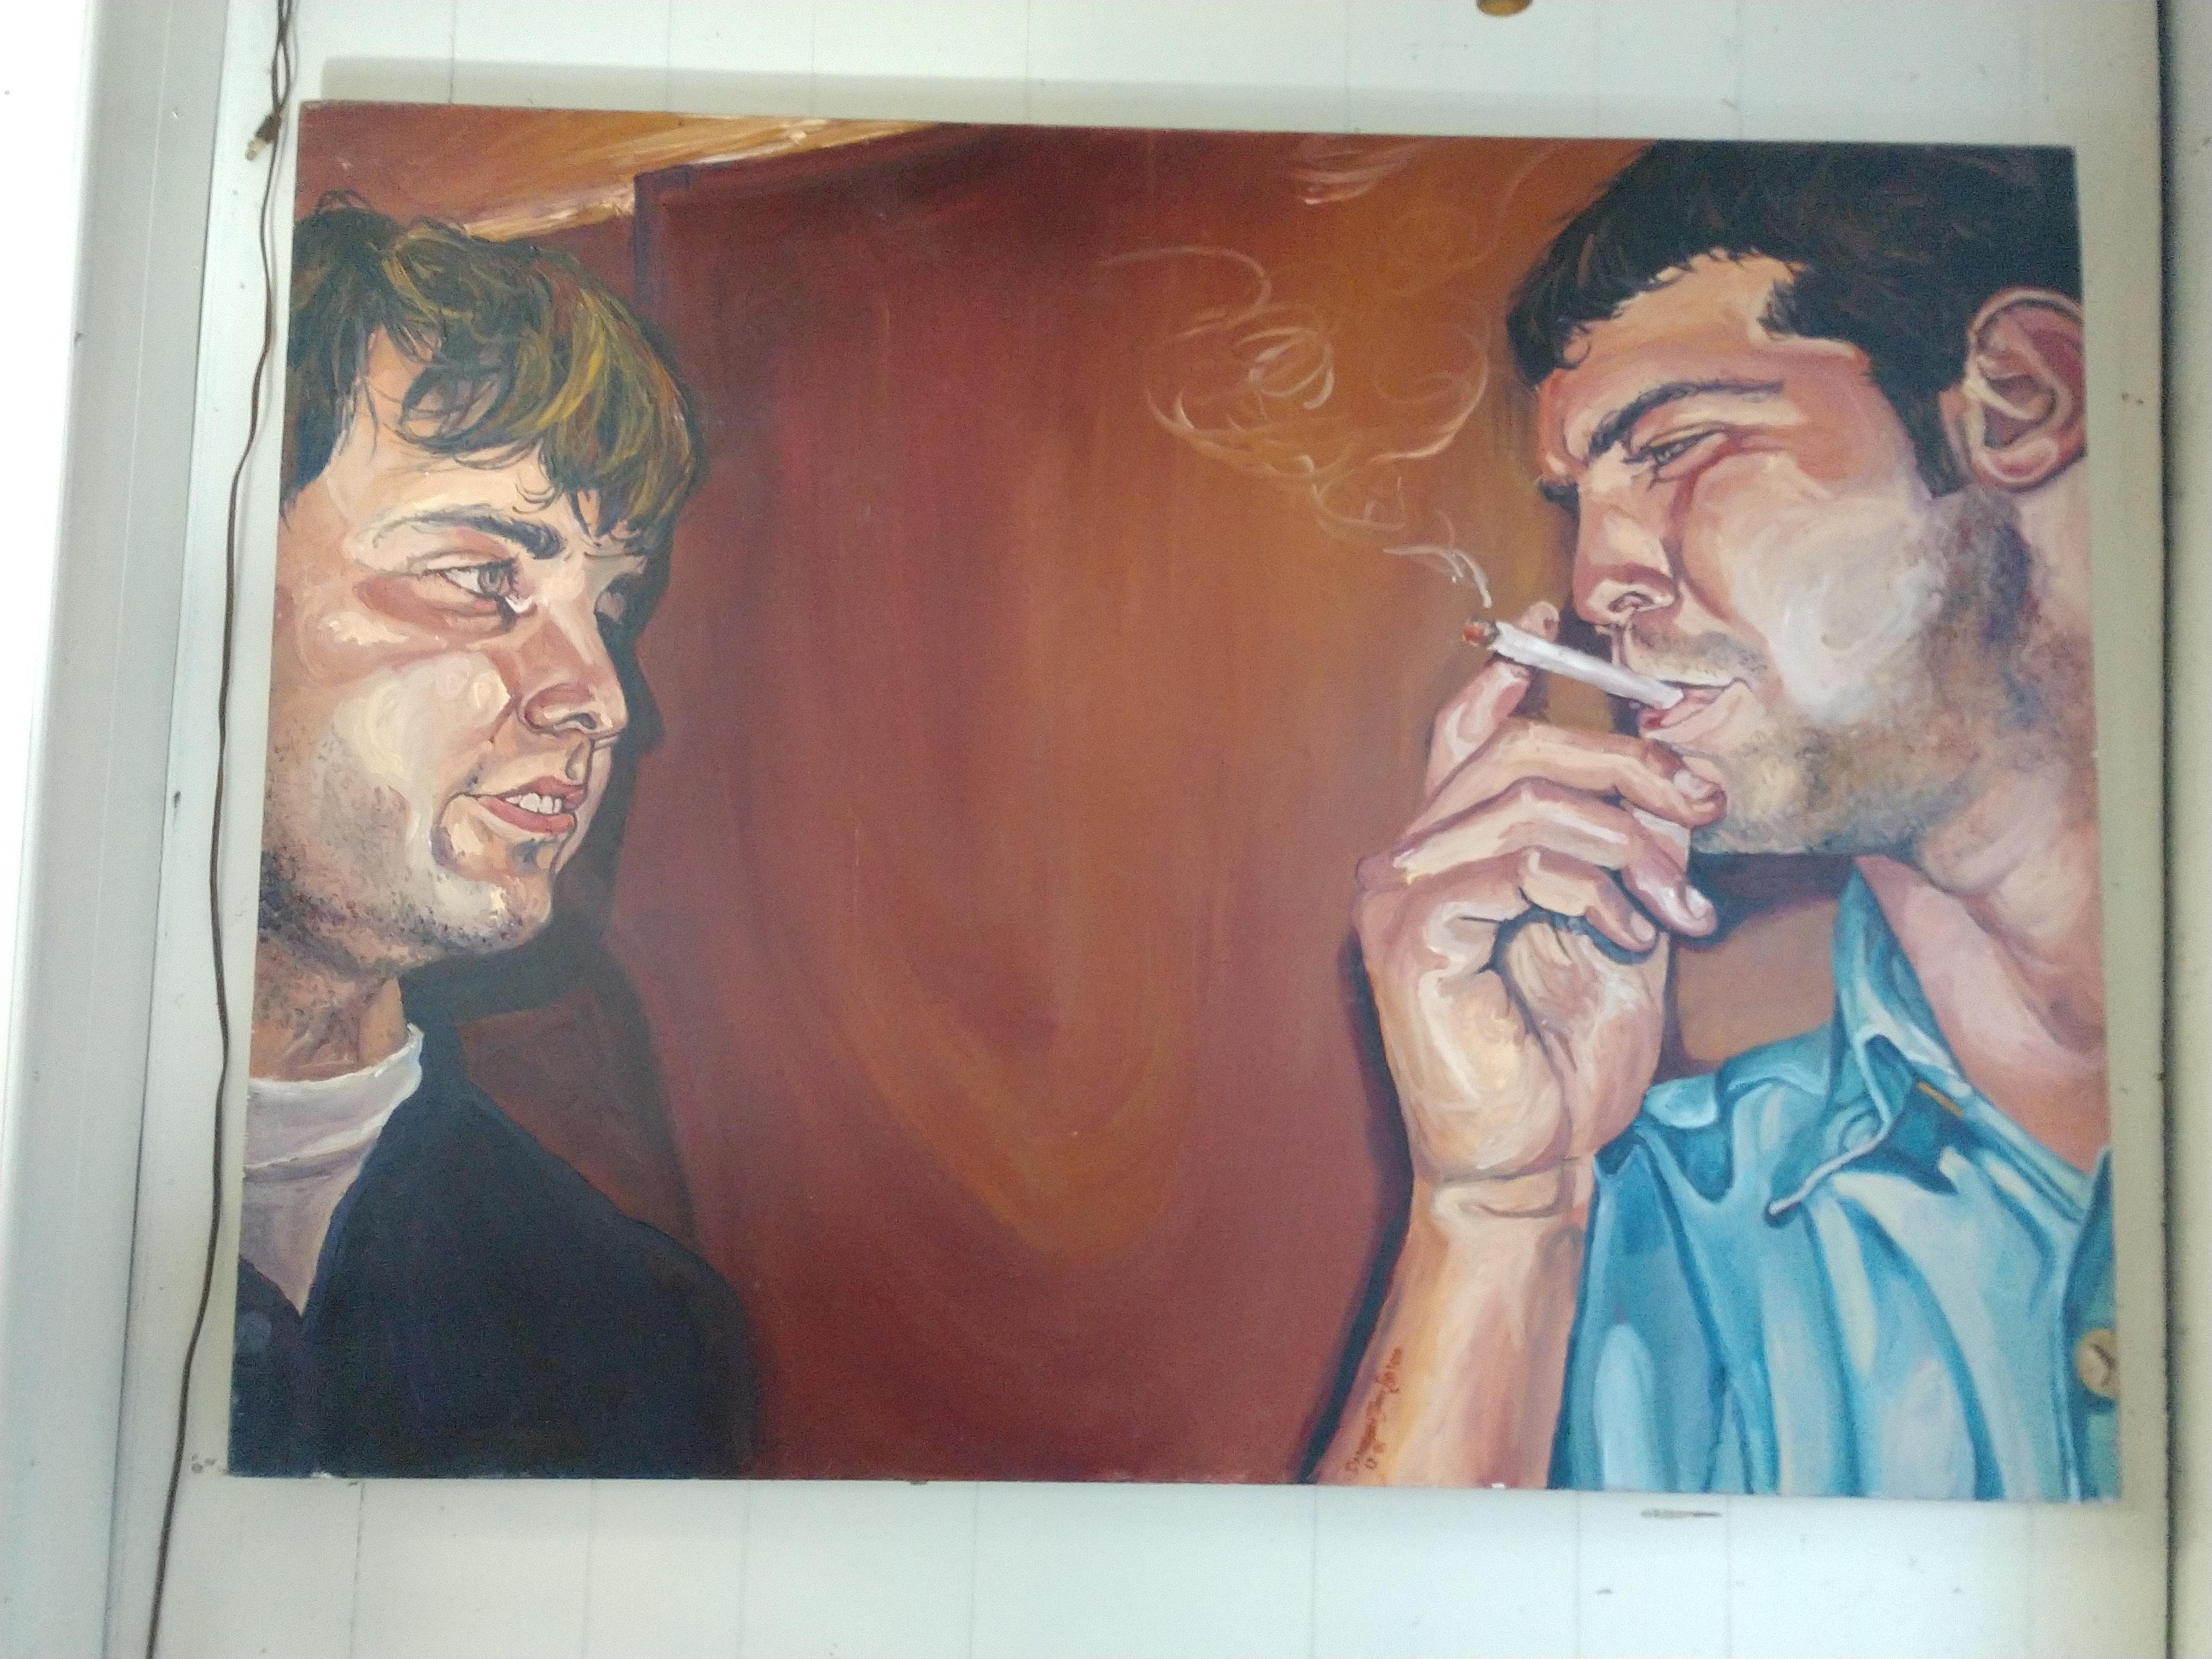 Large depiction of two men, with one smoking. Oil on canvas, signed Danielle Jaffe Ellason. Measures: 48 x 36 x 2. In excellent vintage condition with minimal wear.